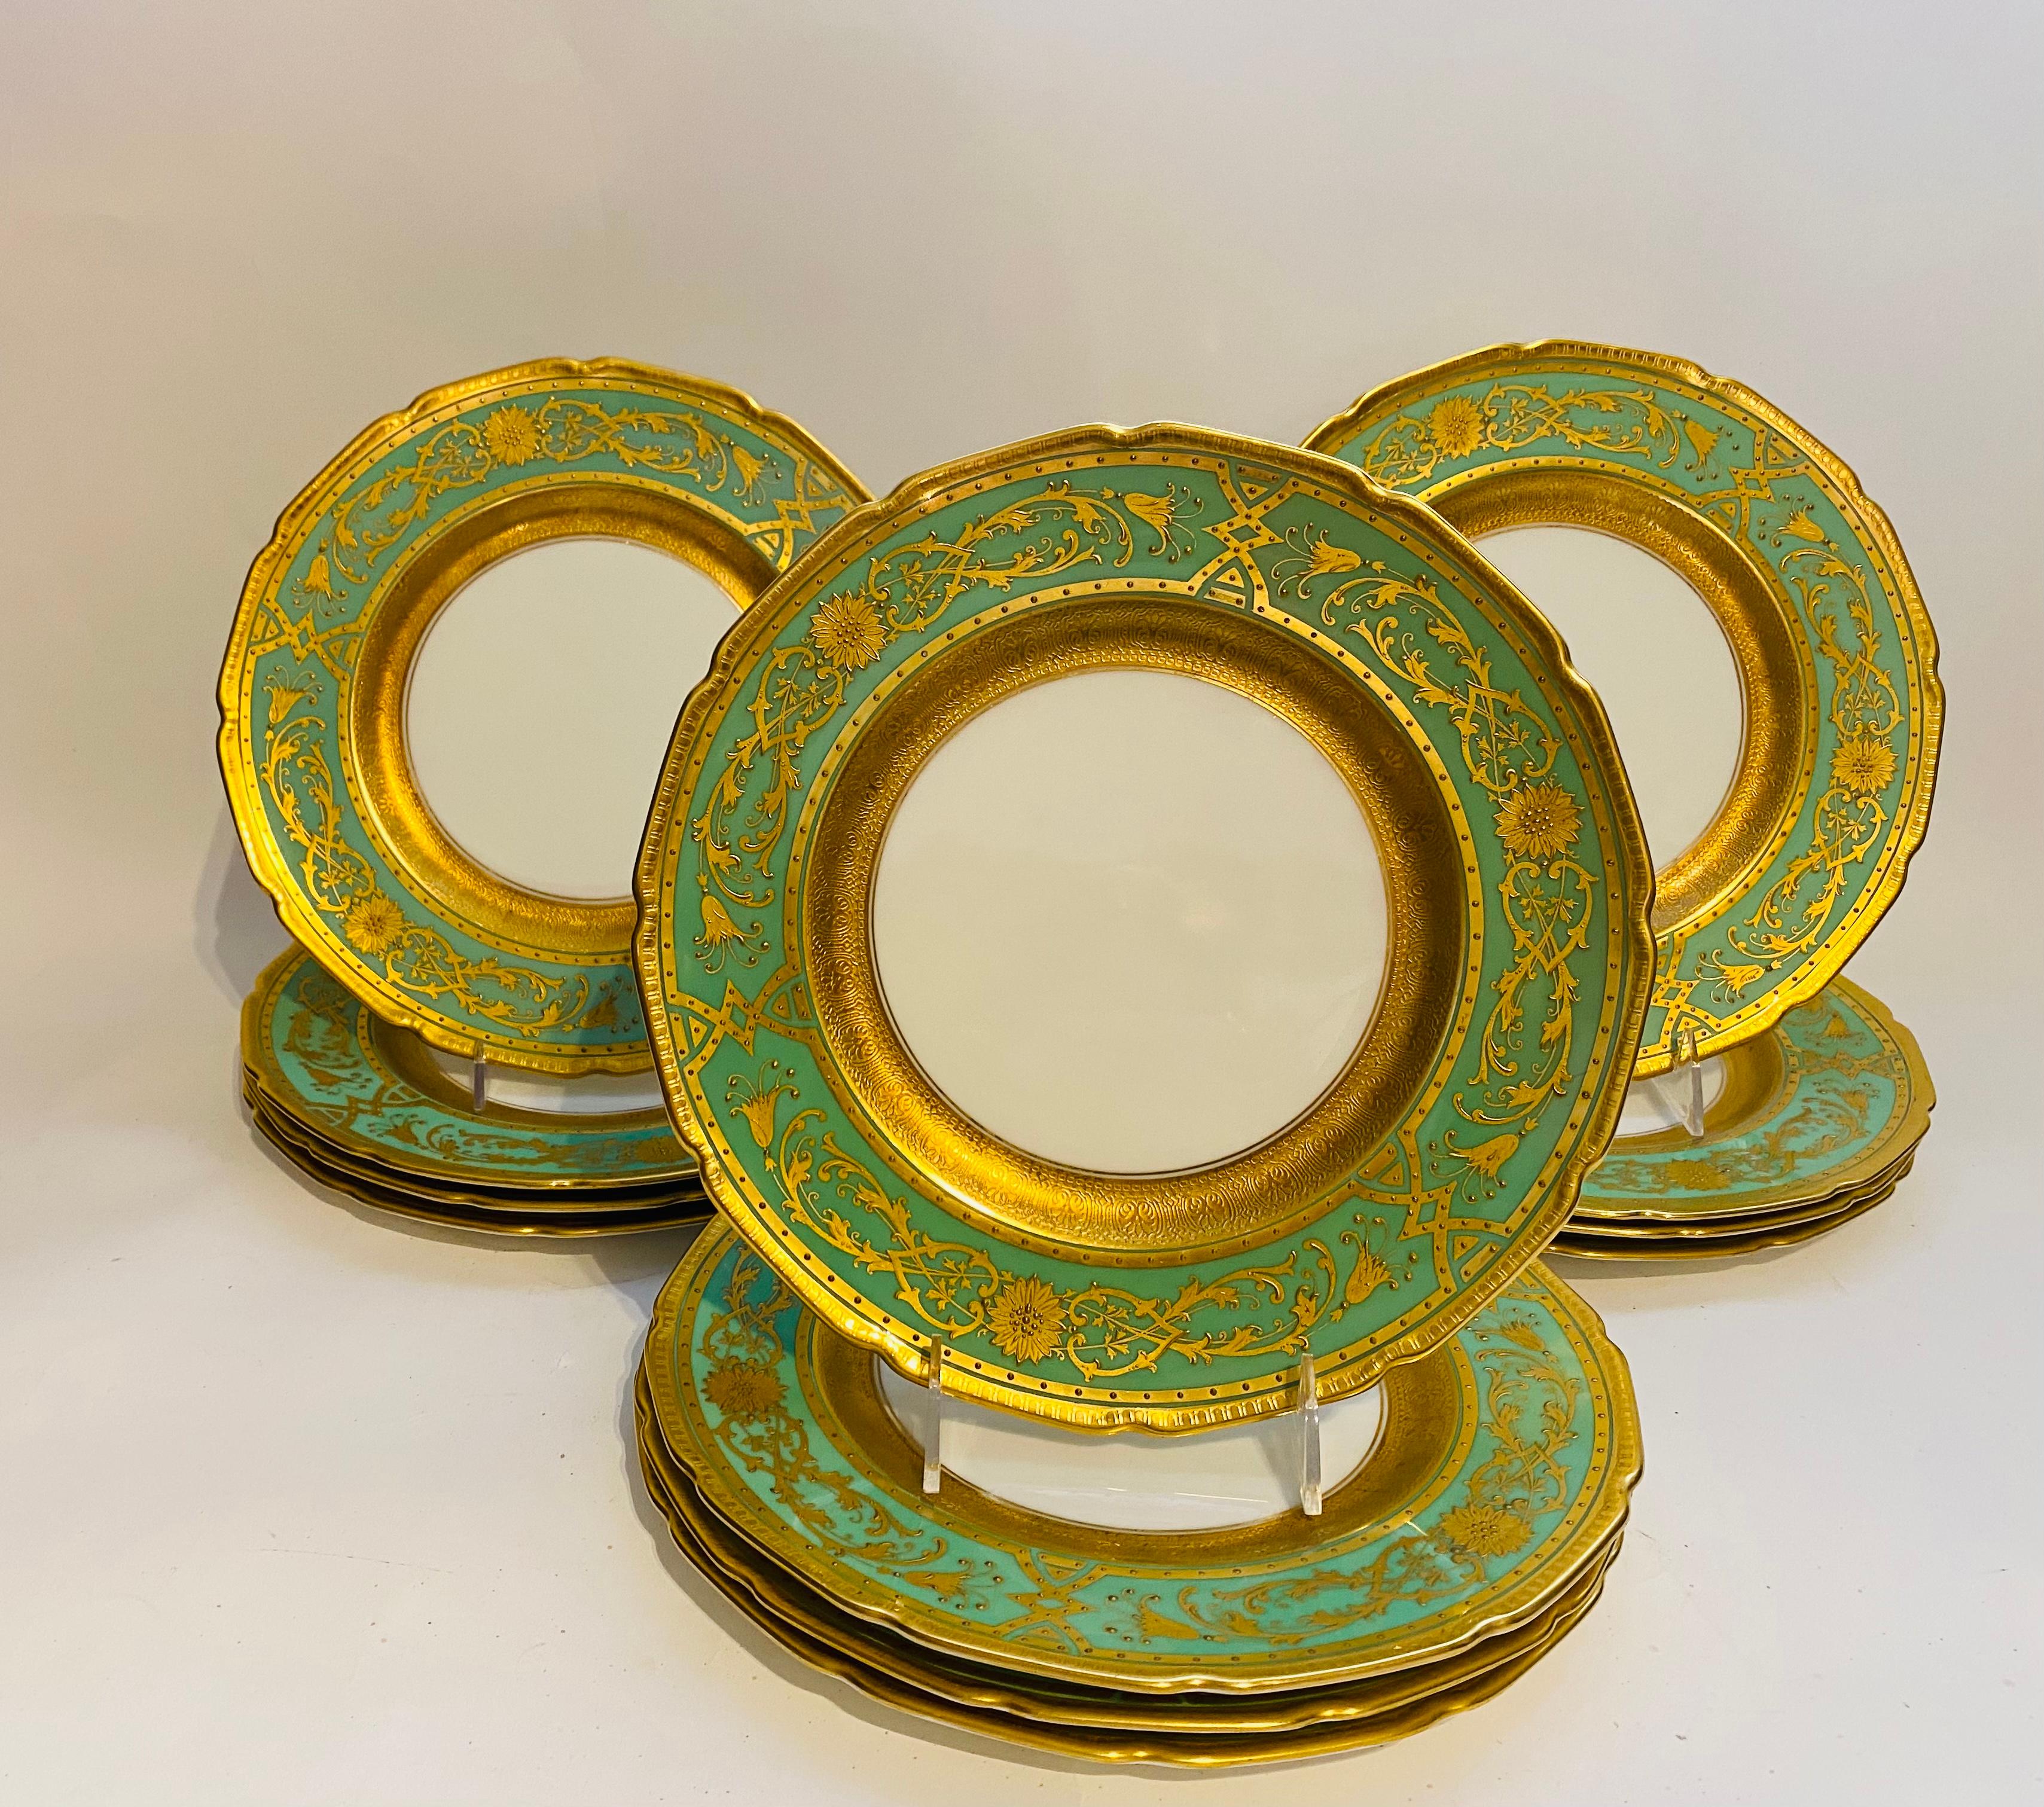 Another beautiful set of 12 dinner plates by Royal Doulton of England. This set features the classic Robert Allen shape and beautiful raised gilding on a vibrant green collar. Double 24 karat gilt bands surround this pretty pattern with the one that